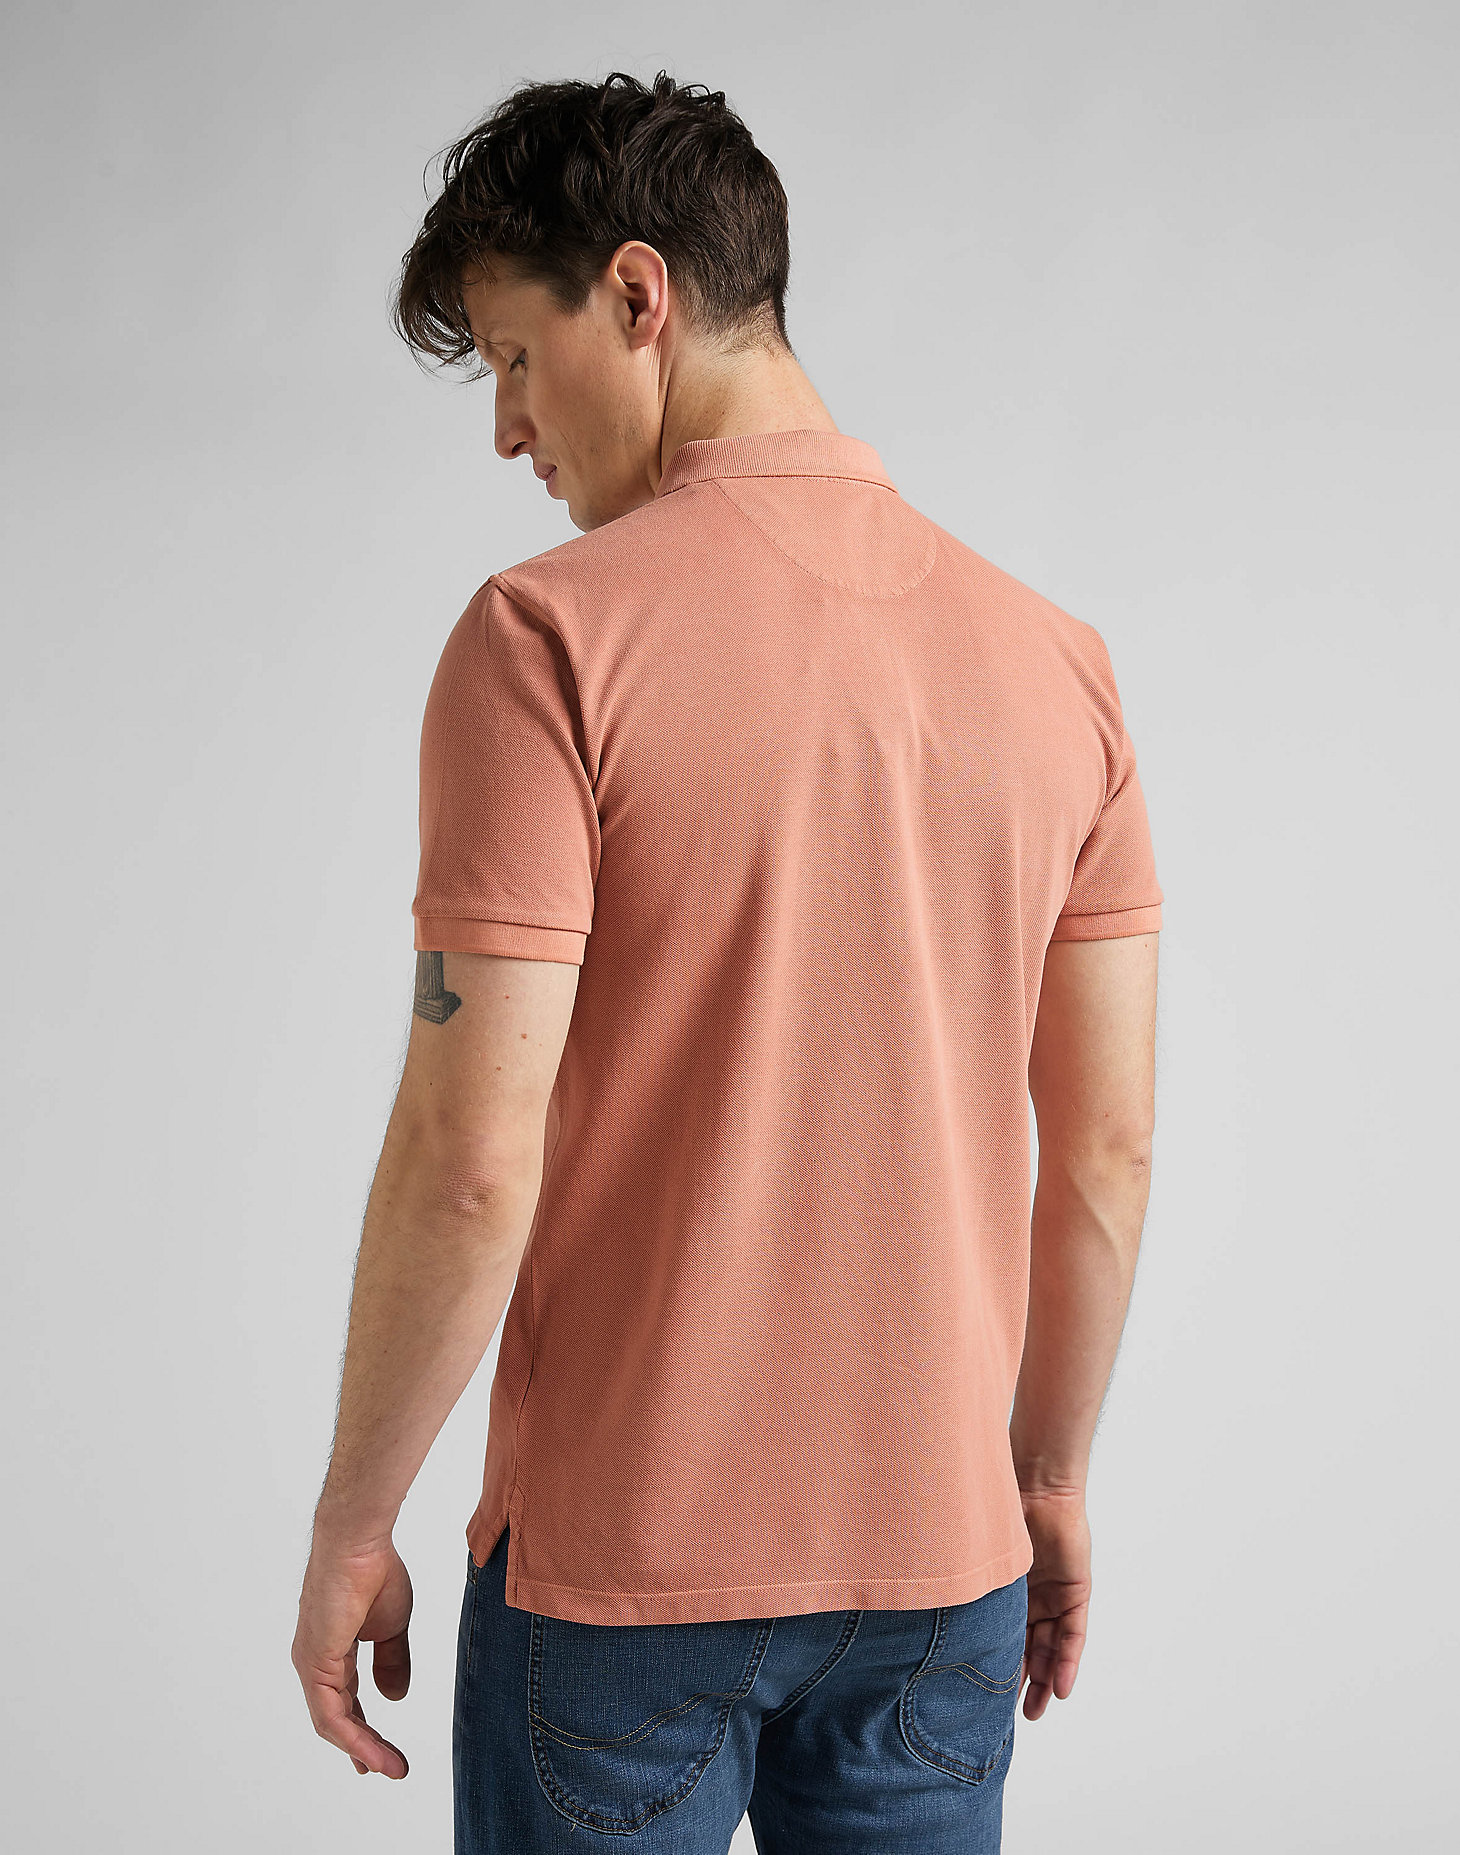 Natural Dye Polo in Rust alternative view 1